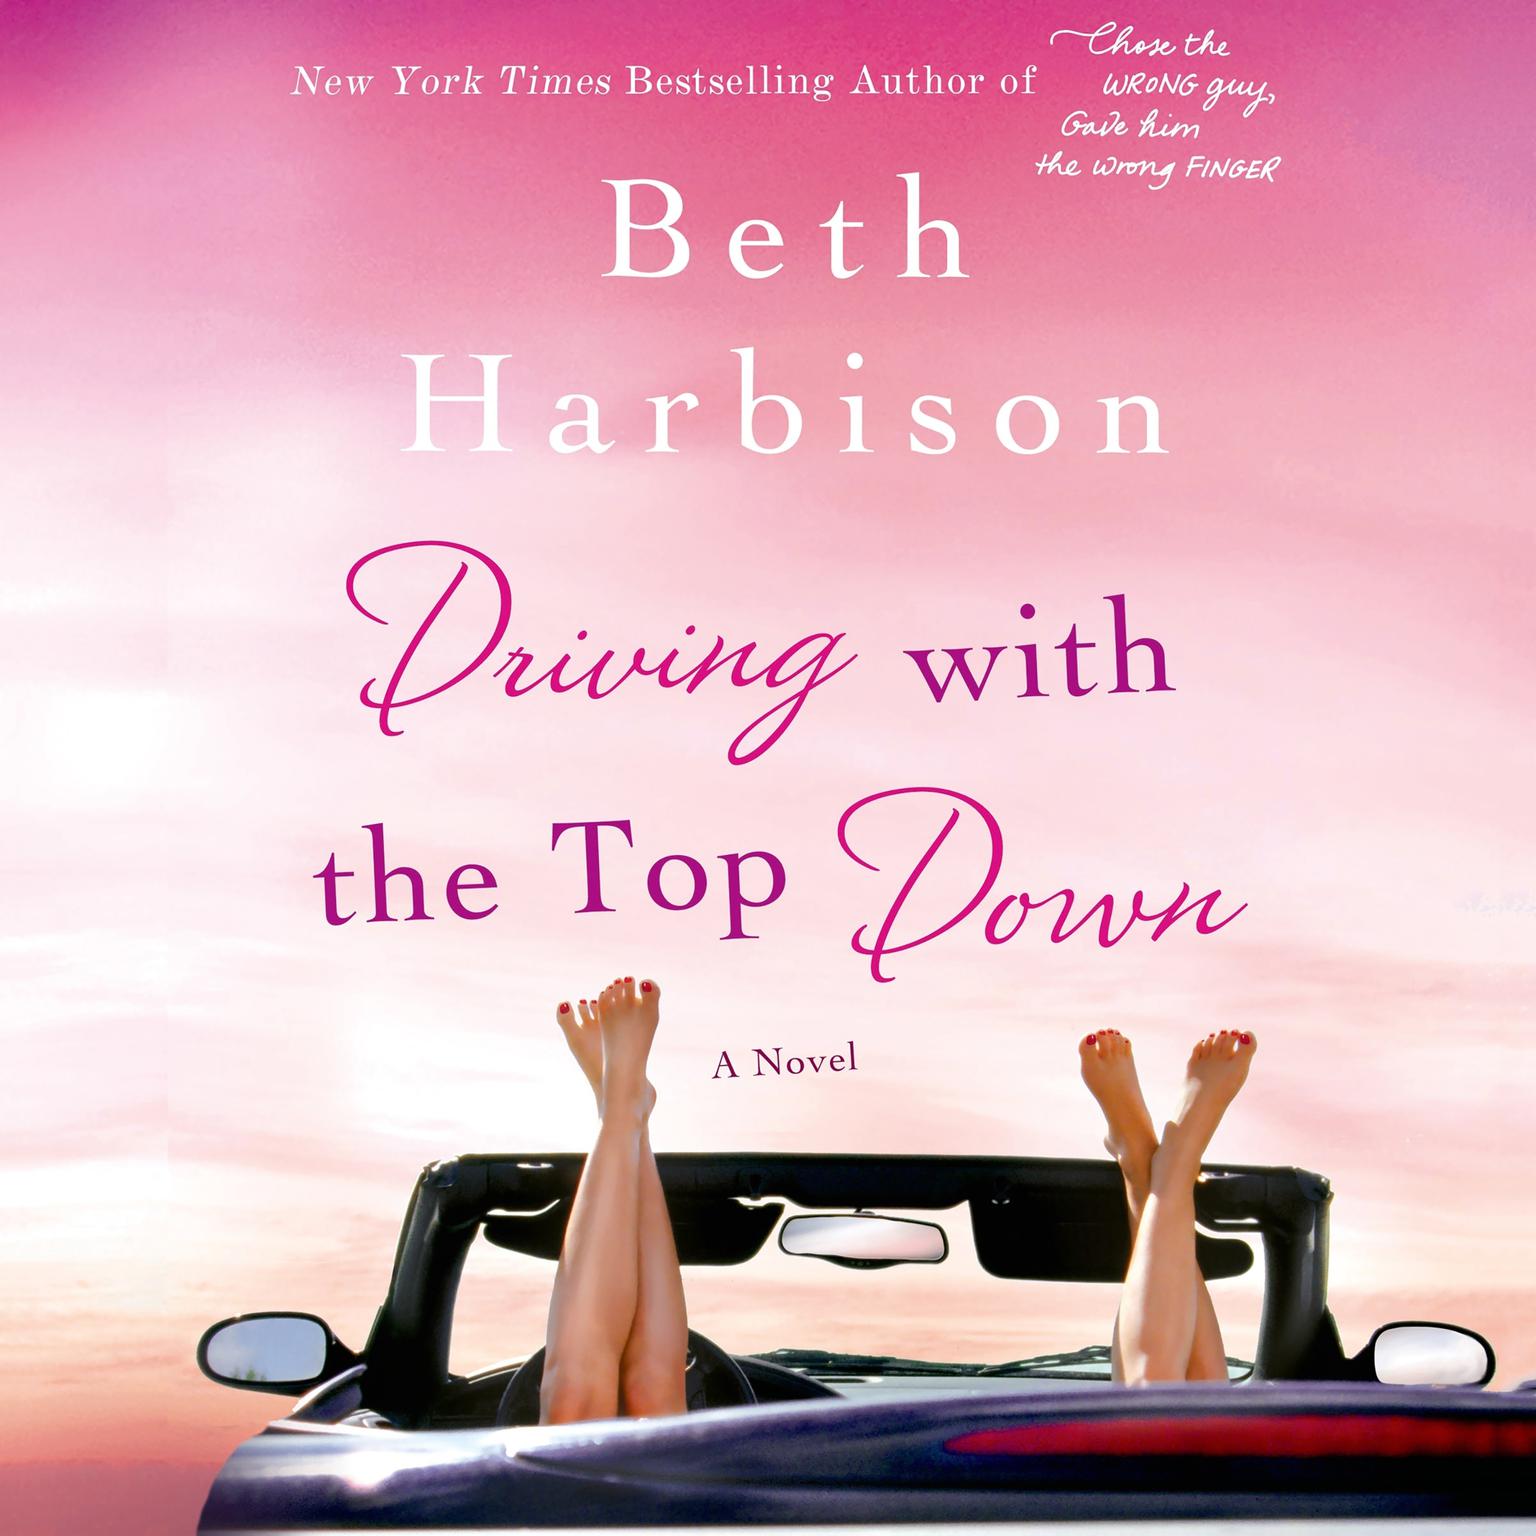 Driving with the Top Down: A Novel Audiobook, by Beth Harbison